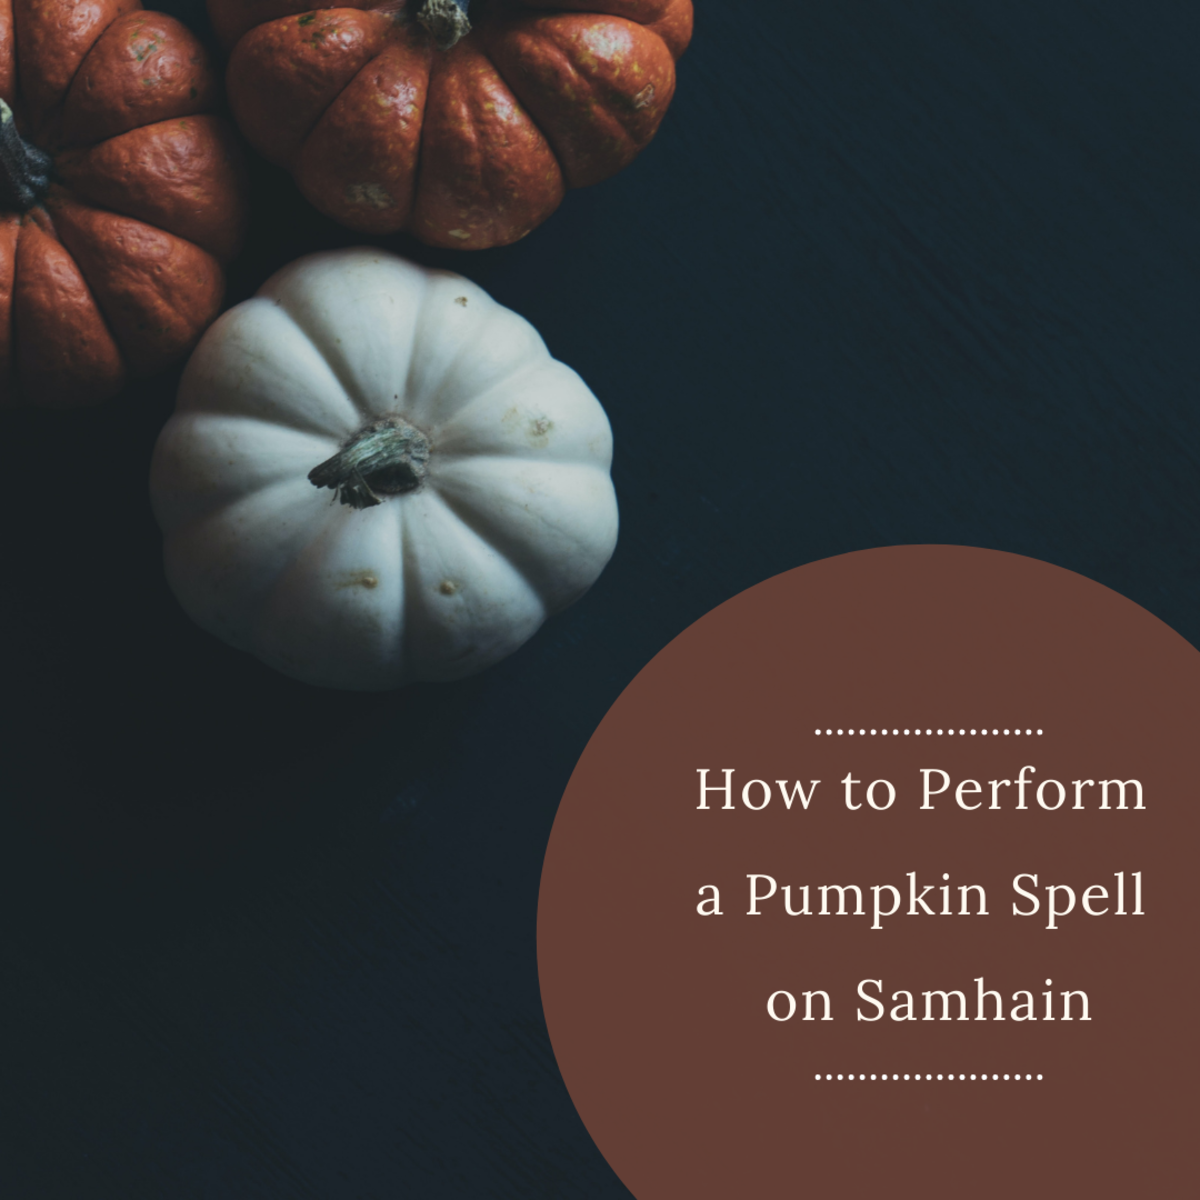 A pumpkin spell is a powerful way to connect with your ancestors during Samhain.